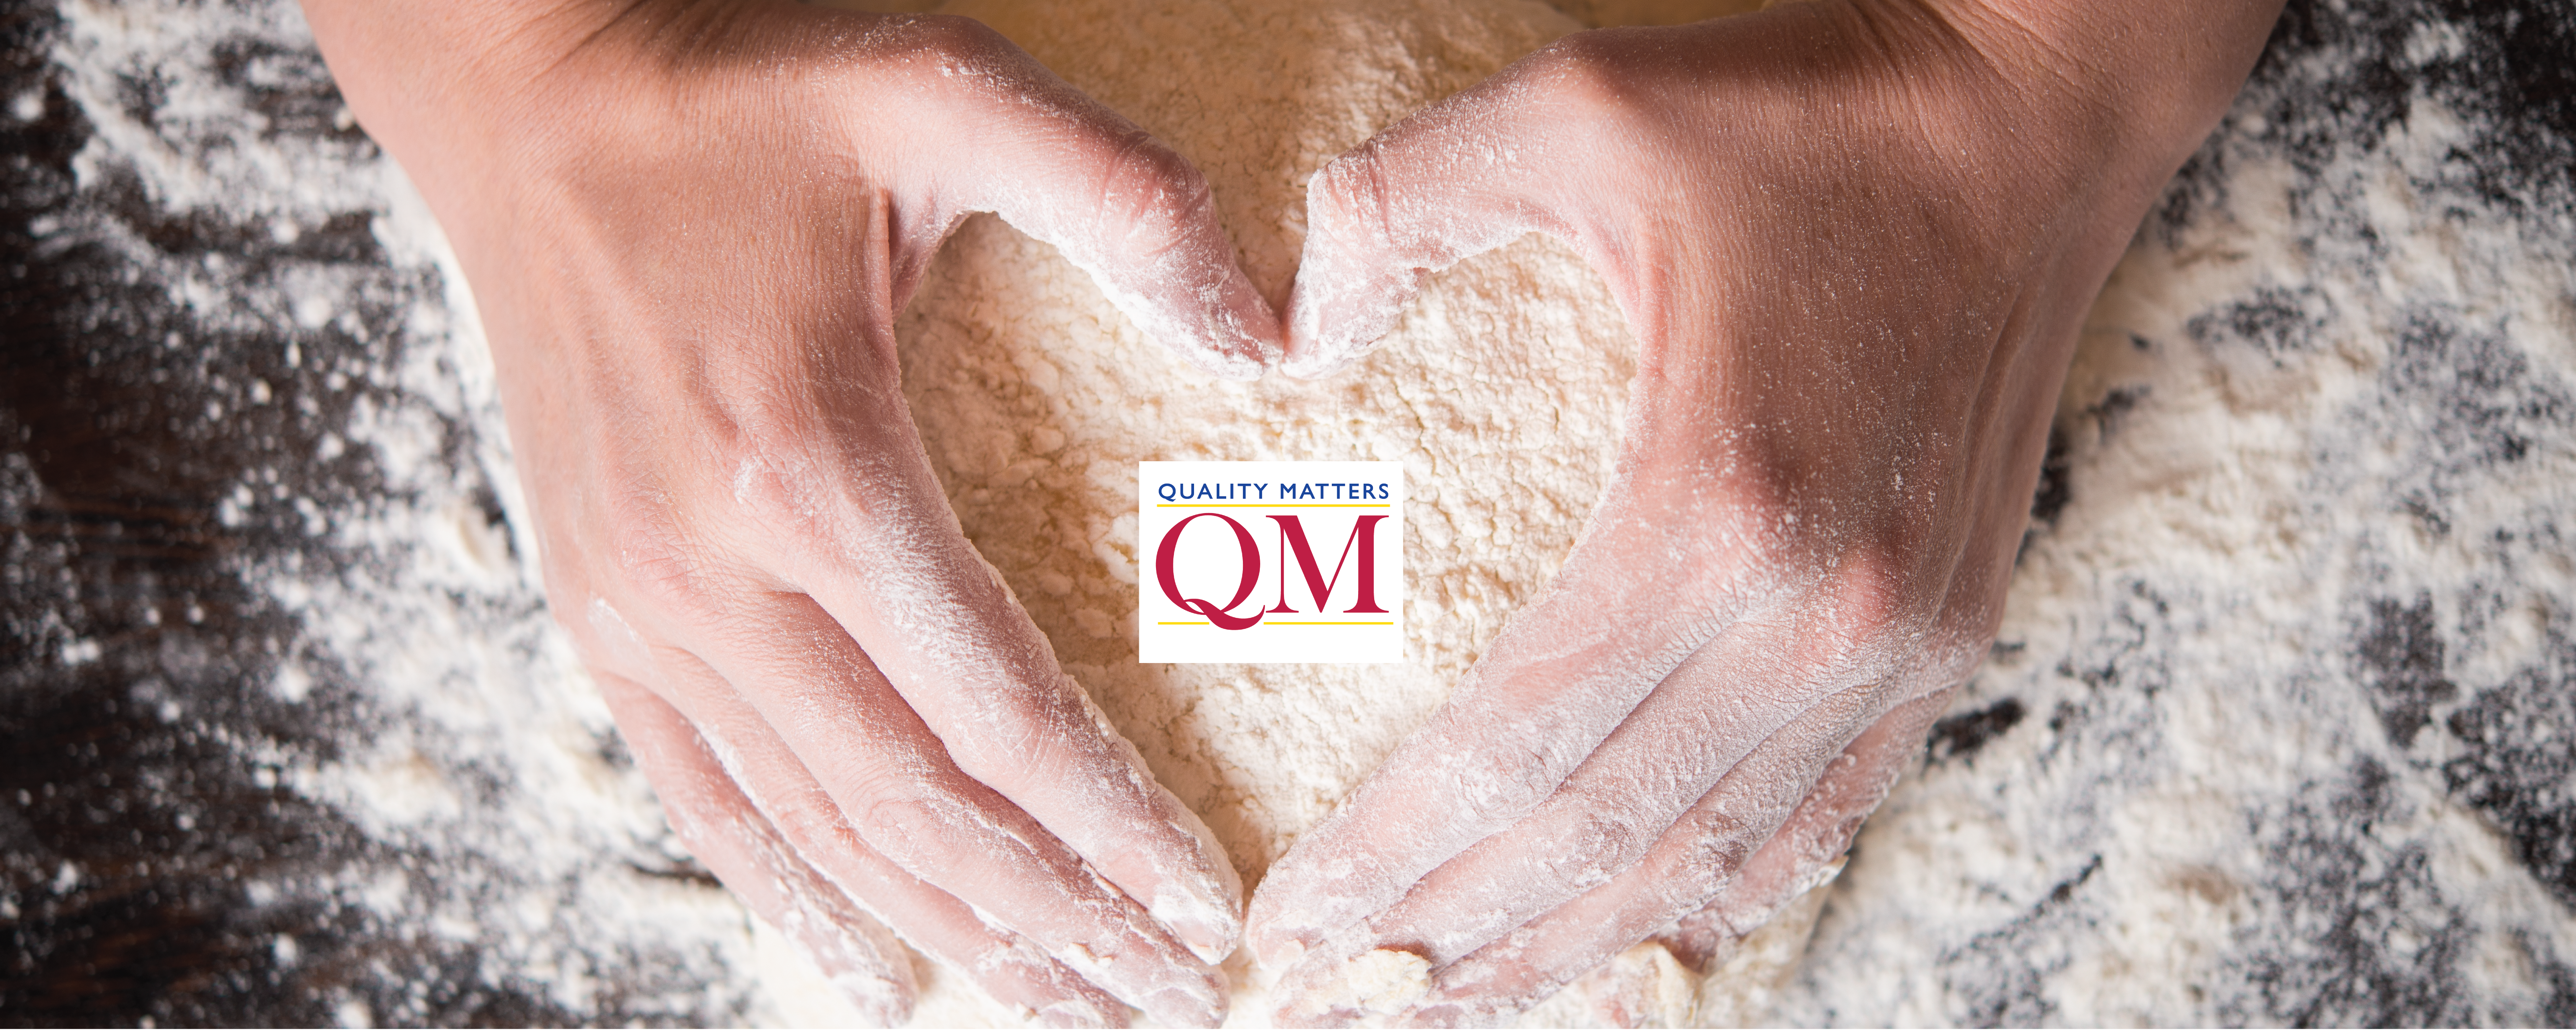 Two hands kneeding dough for bread. The hands are making the shape of a heart and the middle of the dough features a QM logo.